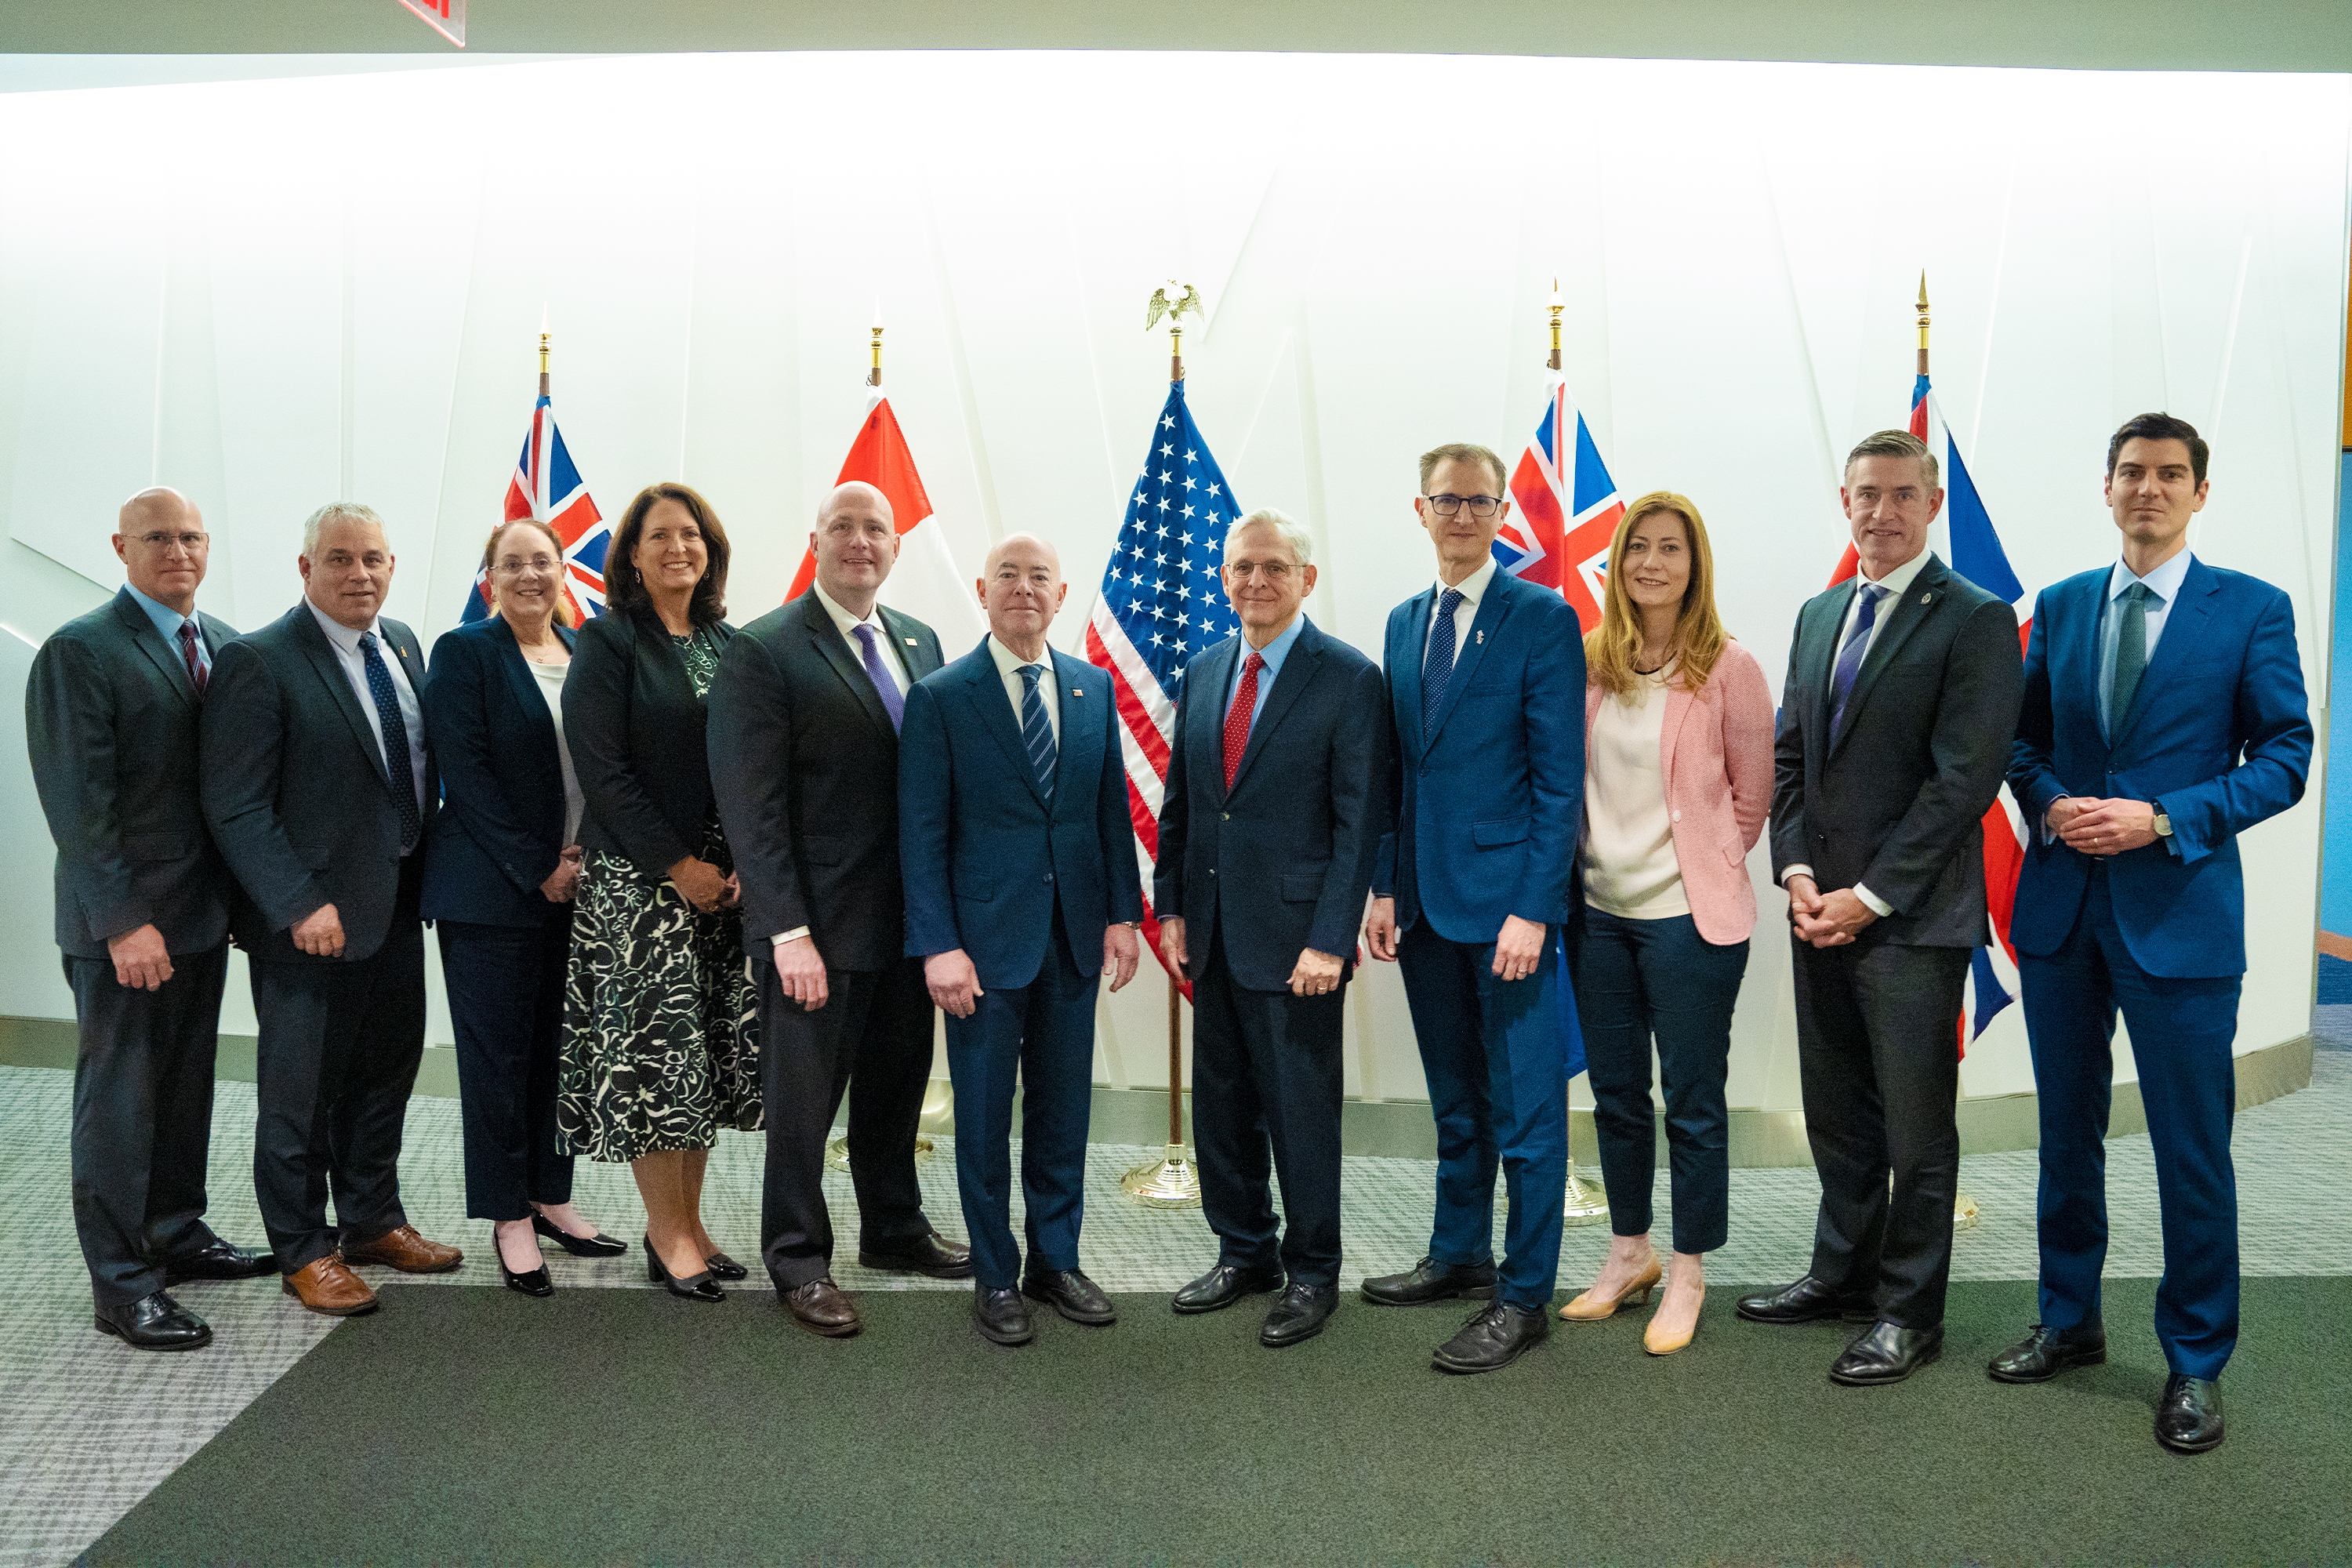 Attorney General Garland at the Meeting of the Five Eyes Law Enforcement Group